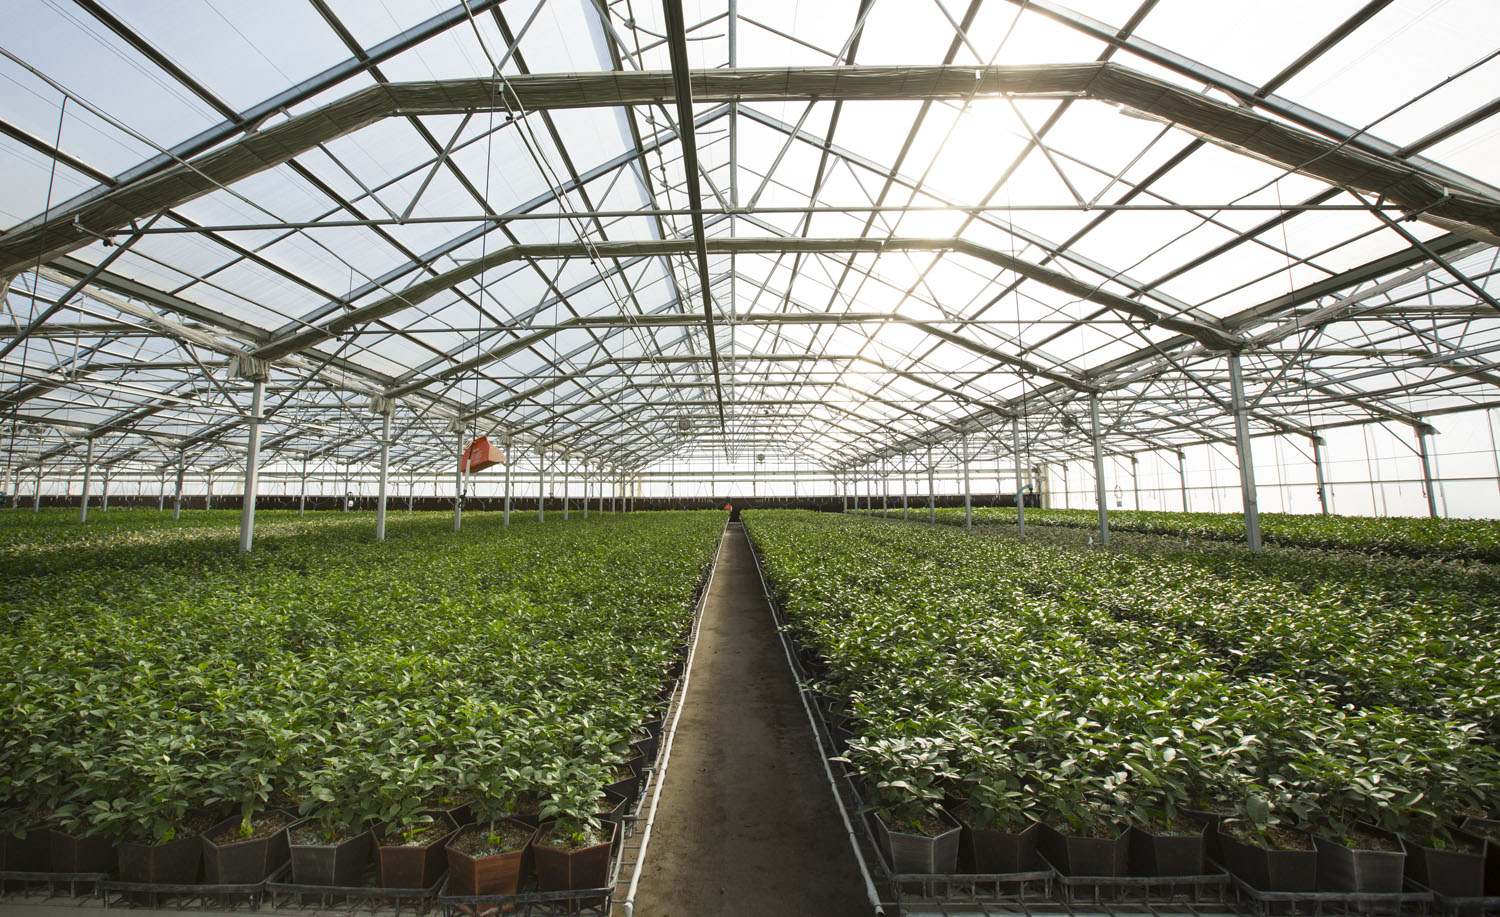 Permanent Crops Nursery Greenhouse in Modesto, CA built by Conley's Manufacturing